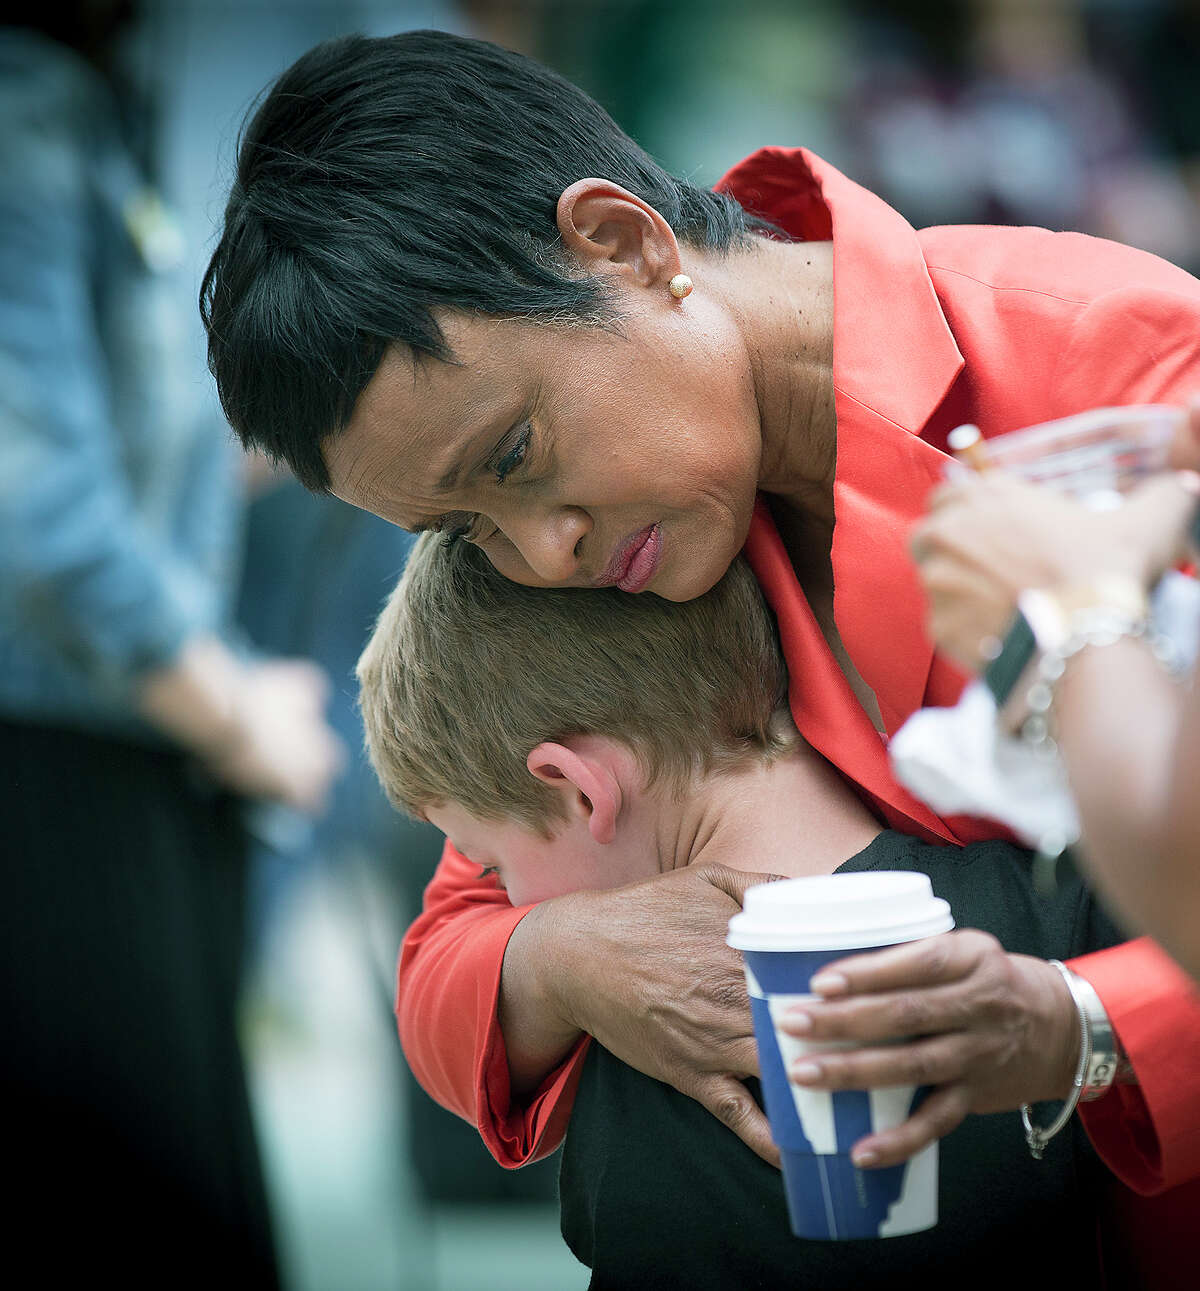 Judge Glenda Hatchett was hugged by Philando Castile supporter Guthrie Morgan, 7, after Jeronimo Yanez was found not guilty on all counts in the shooting death of Philando Castile, Friday, June 16, 2017 in St. Paul, Minn. (Elizabeth Flores/Star Tribune via AP) ORG XMIT: MNMIT113